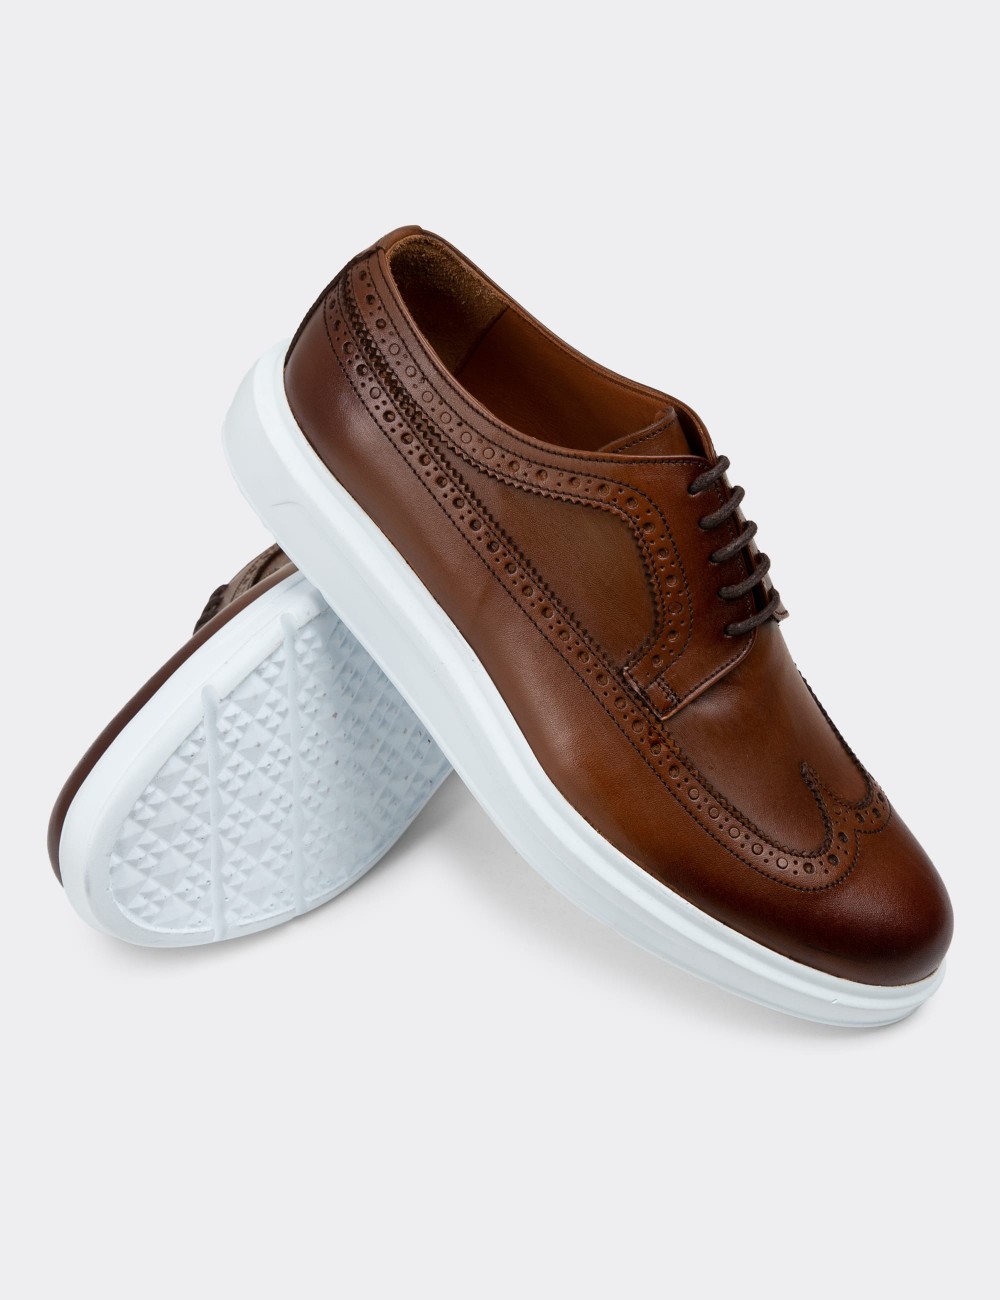 Tan Leather Lace-up Shoes - 01293MTBAP06